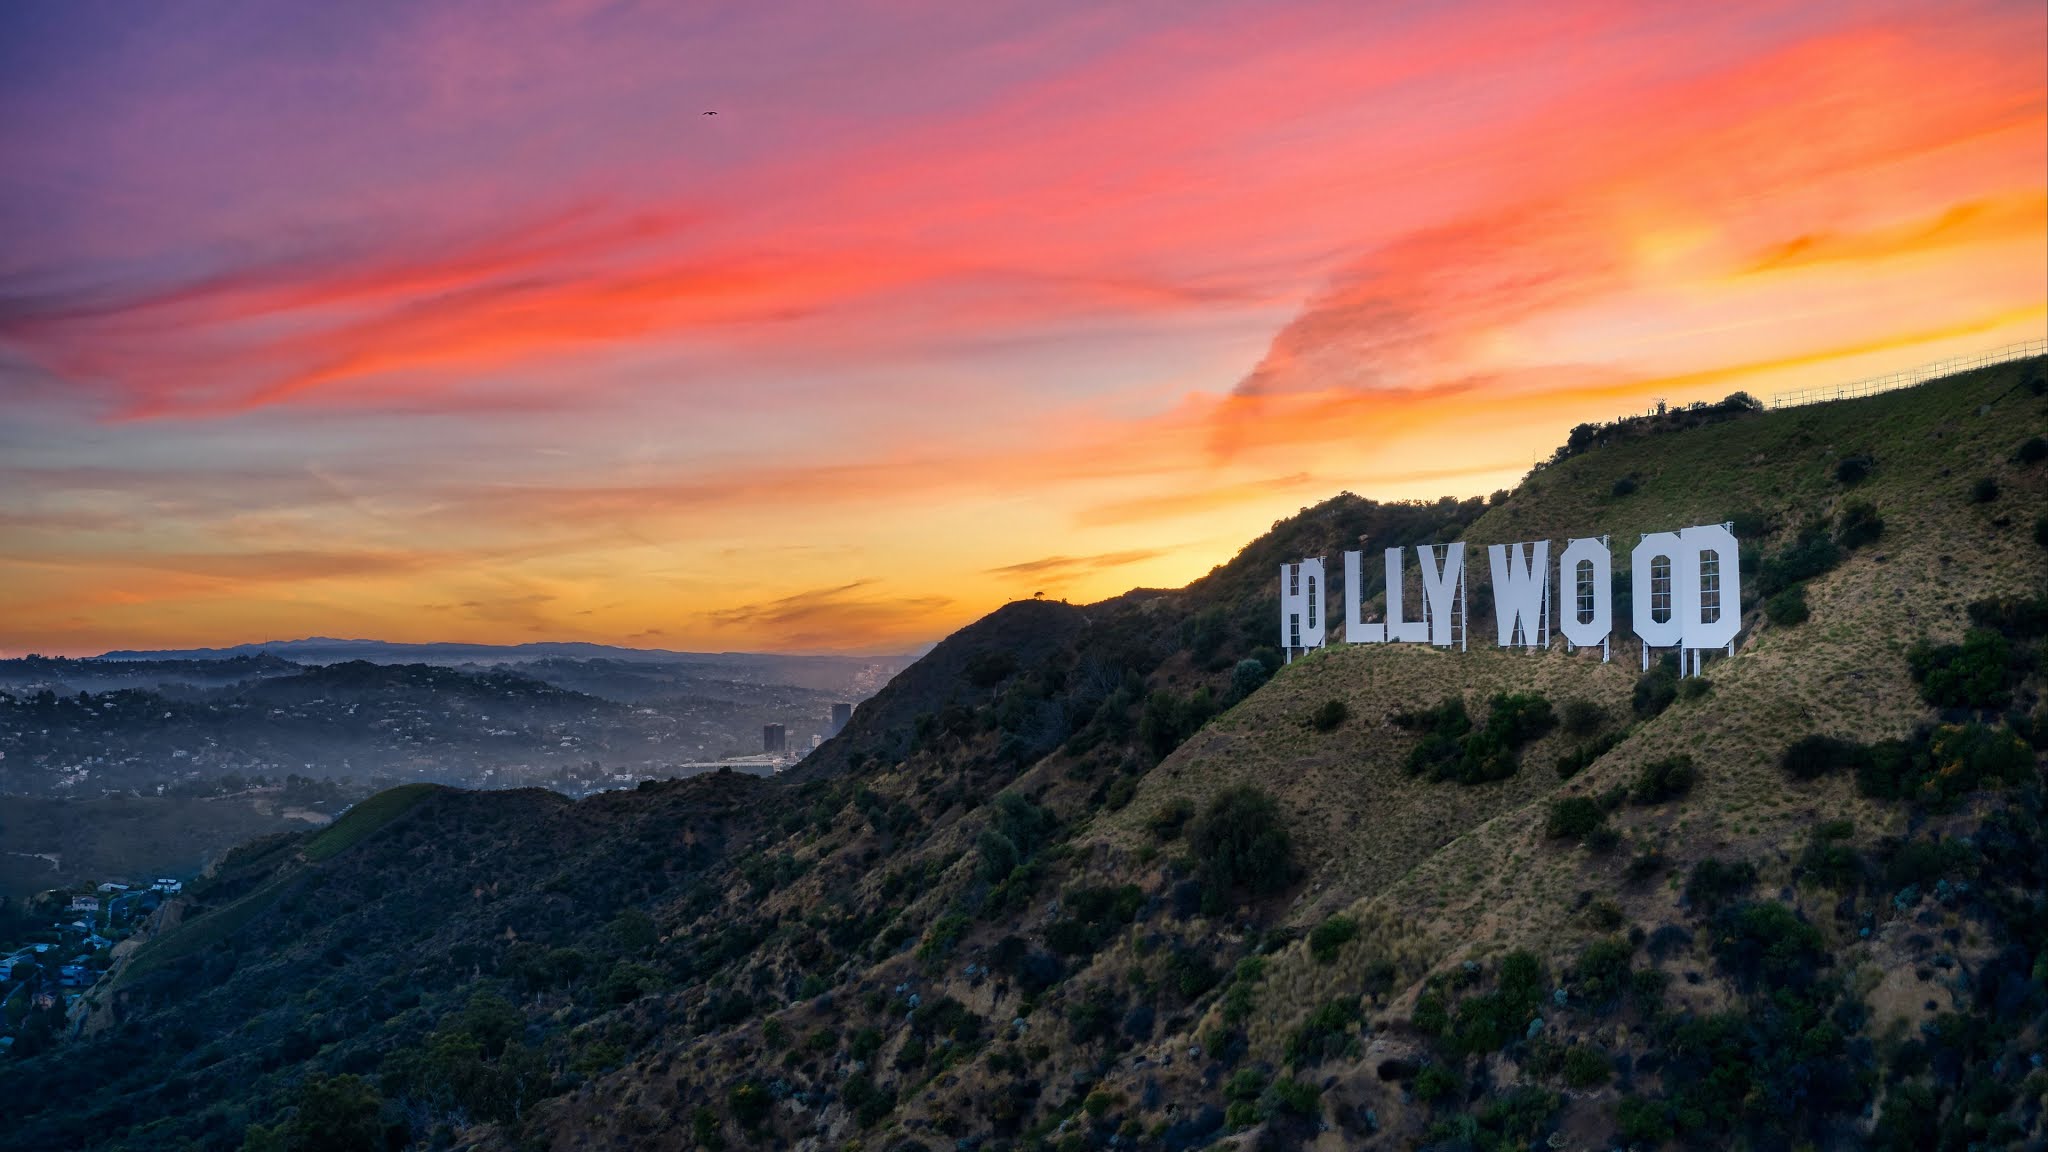 Wallpaper Hollywood Los Angeles Sunset